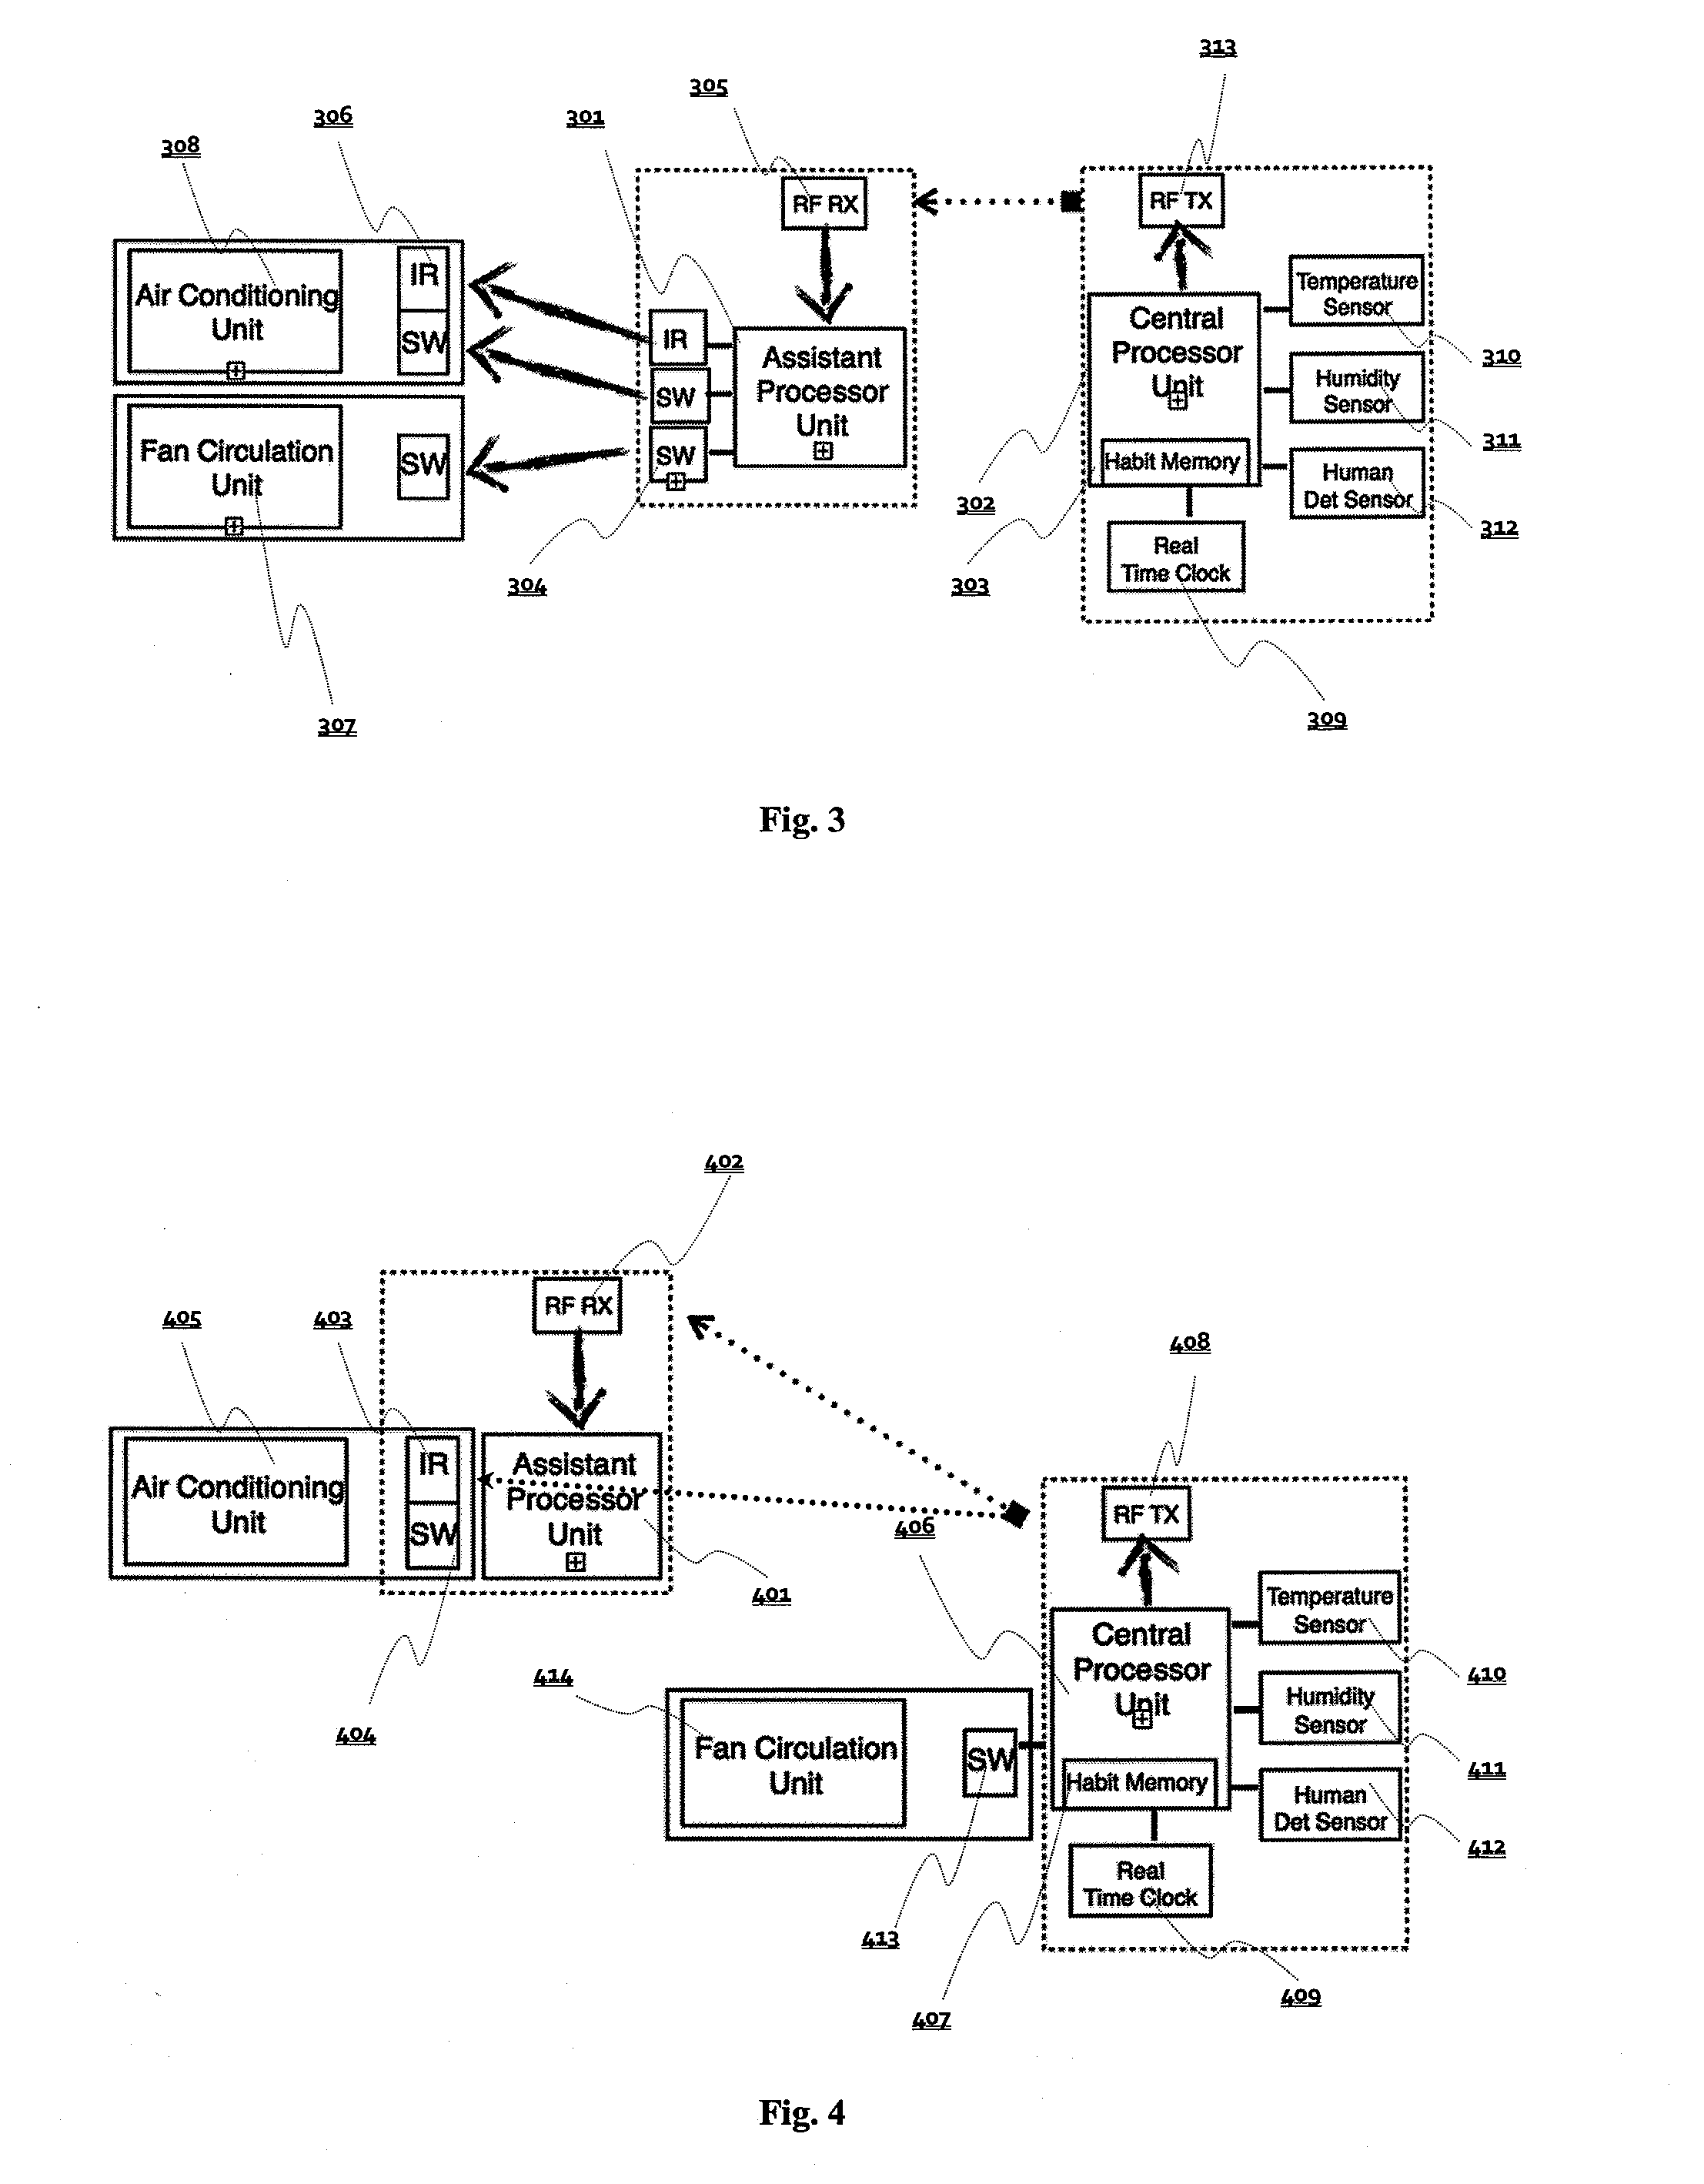 Method for Energy Saving On Electrical Systems Using Habit Oriented Control